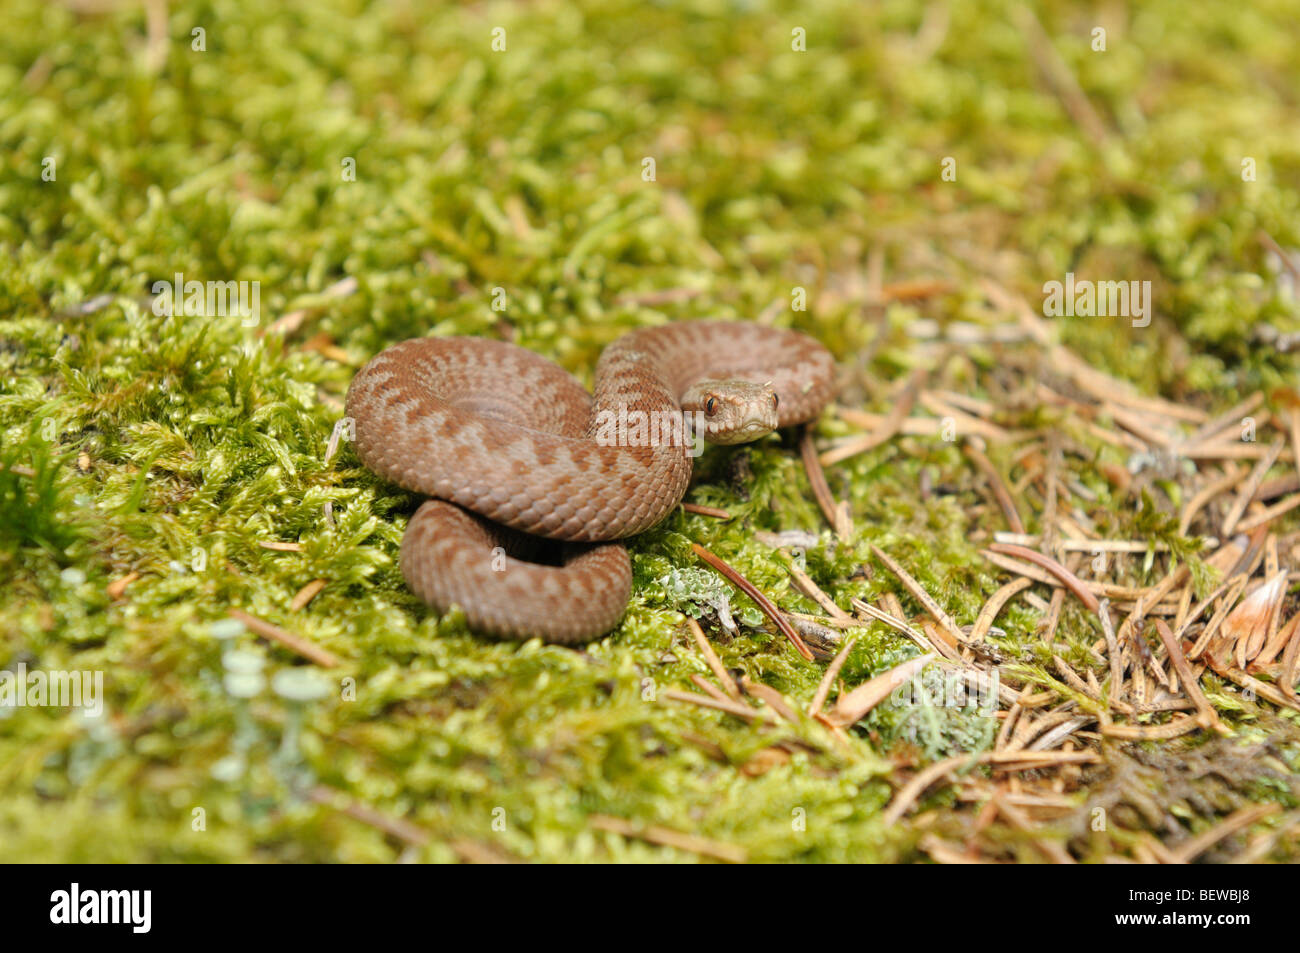 Young Viper curled up on moss, Germany Stock Photo